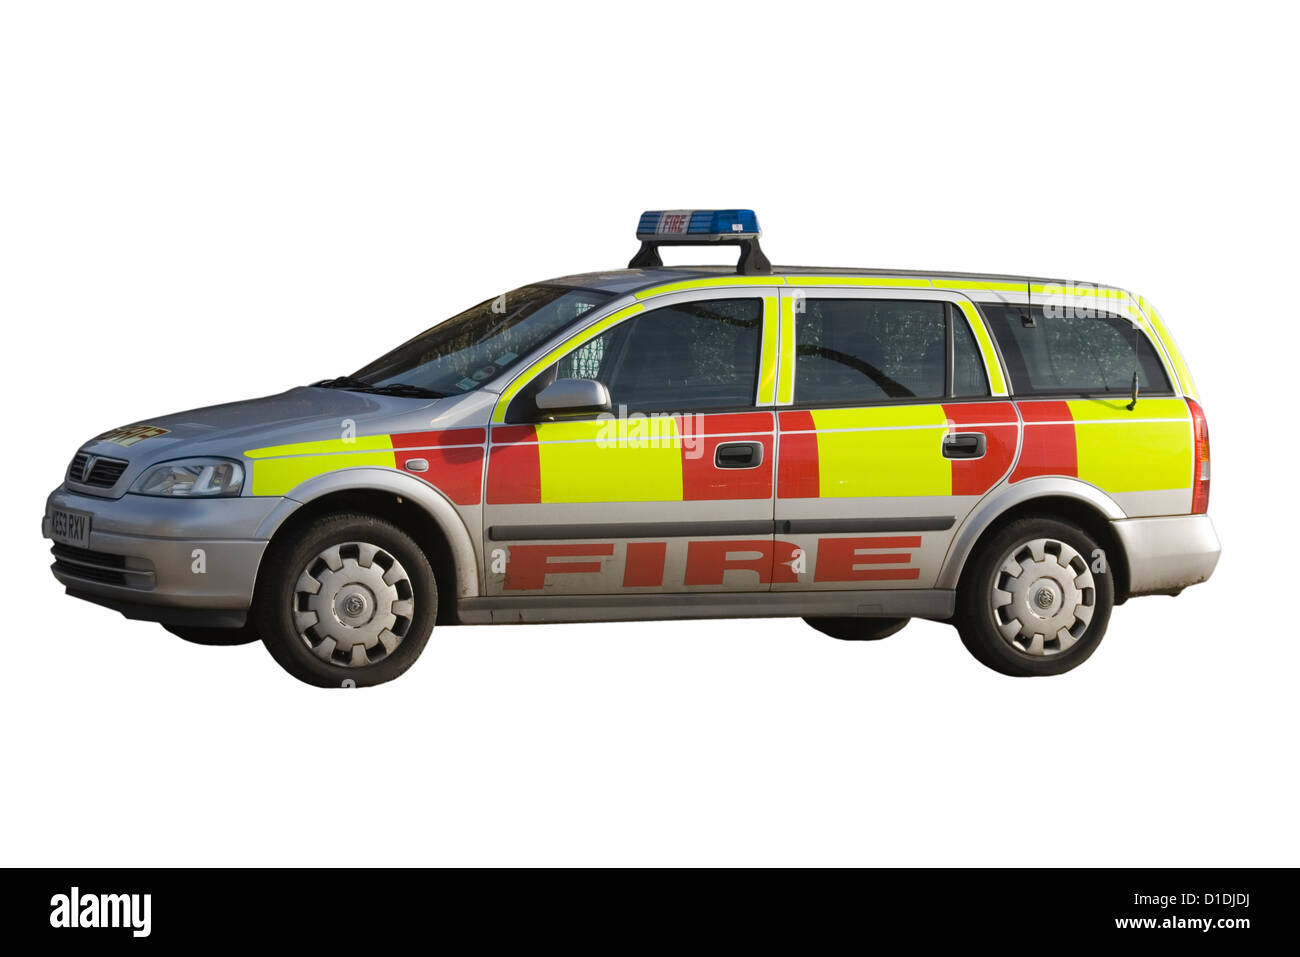 Surrey Fire and Rescue Service Car Stock Photo